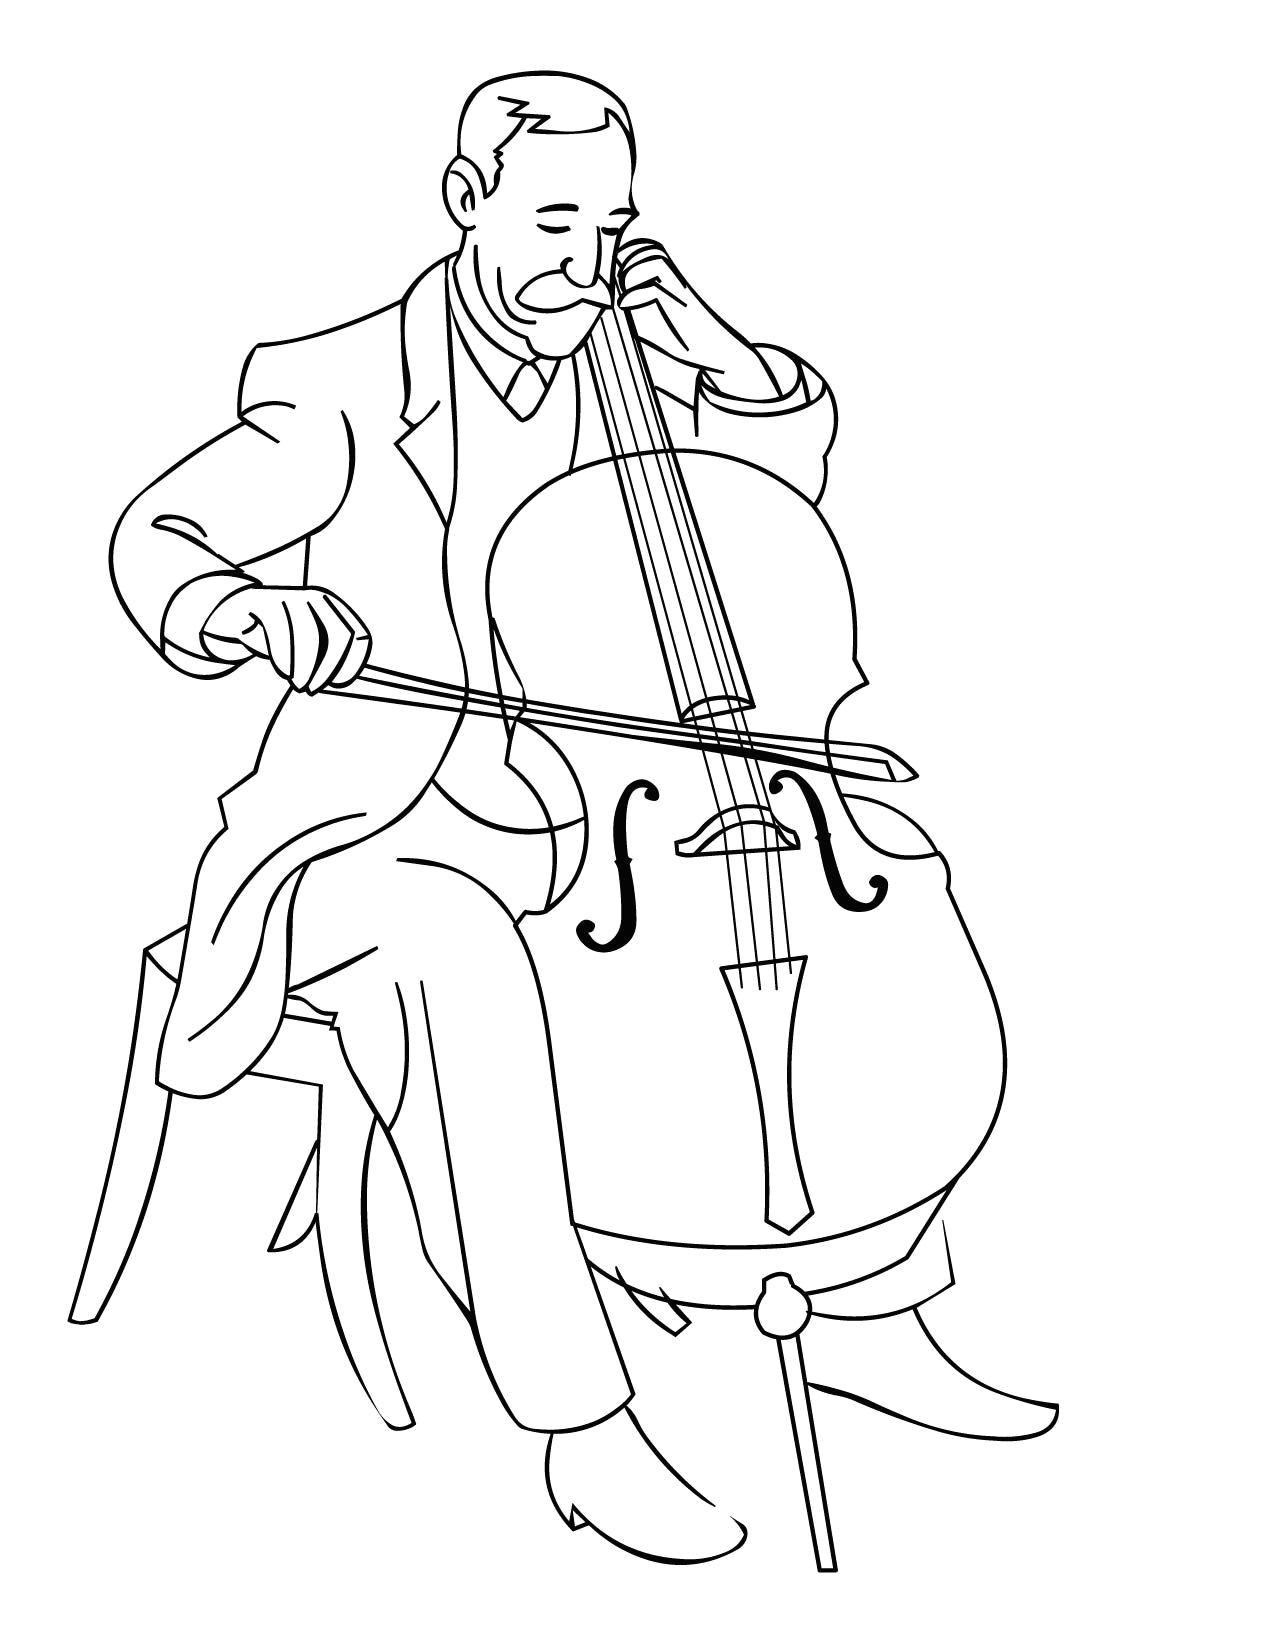 easy to draw instruments music coloring pages of easy to draw instruments home coloring pages best